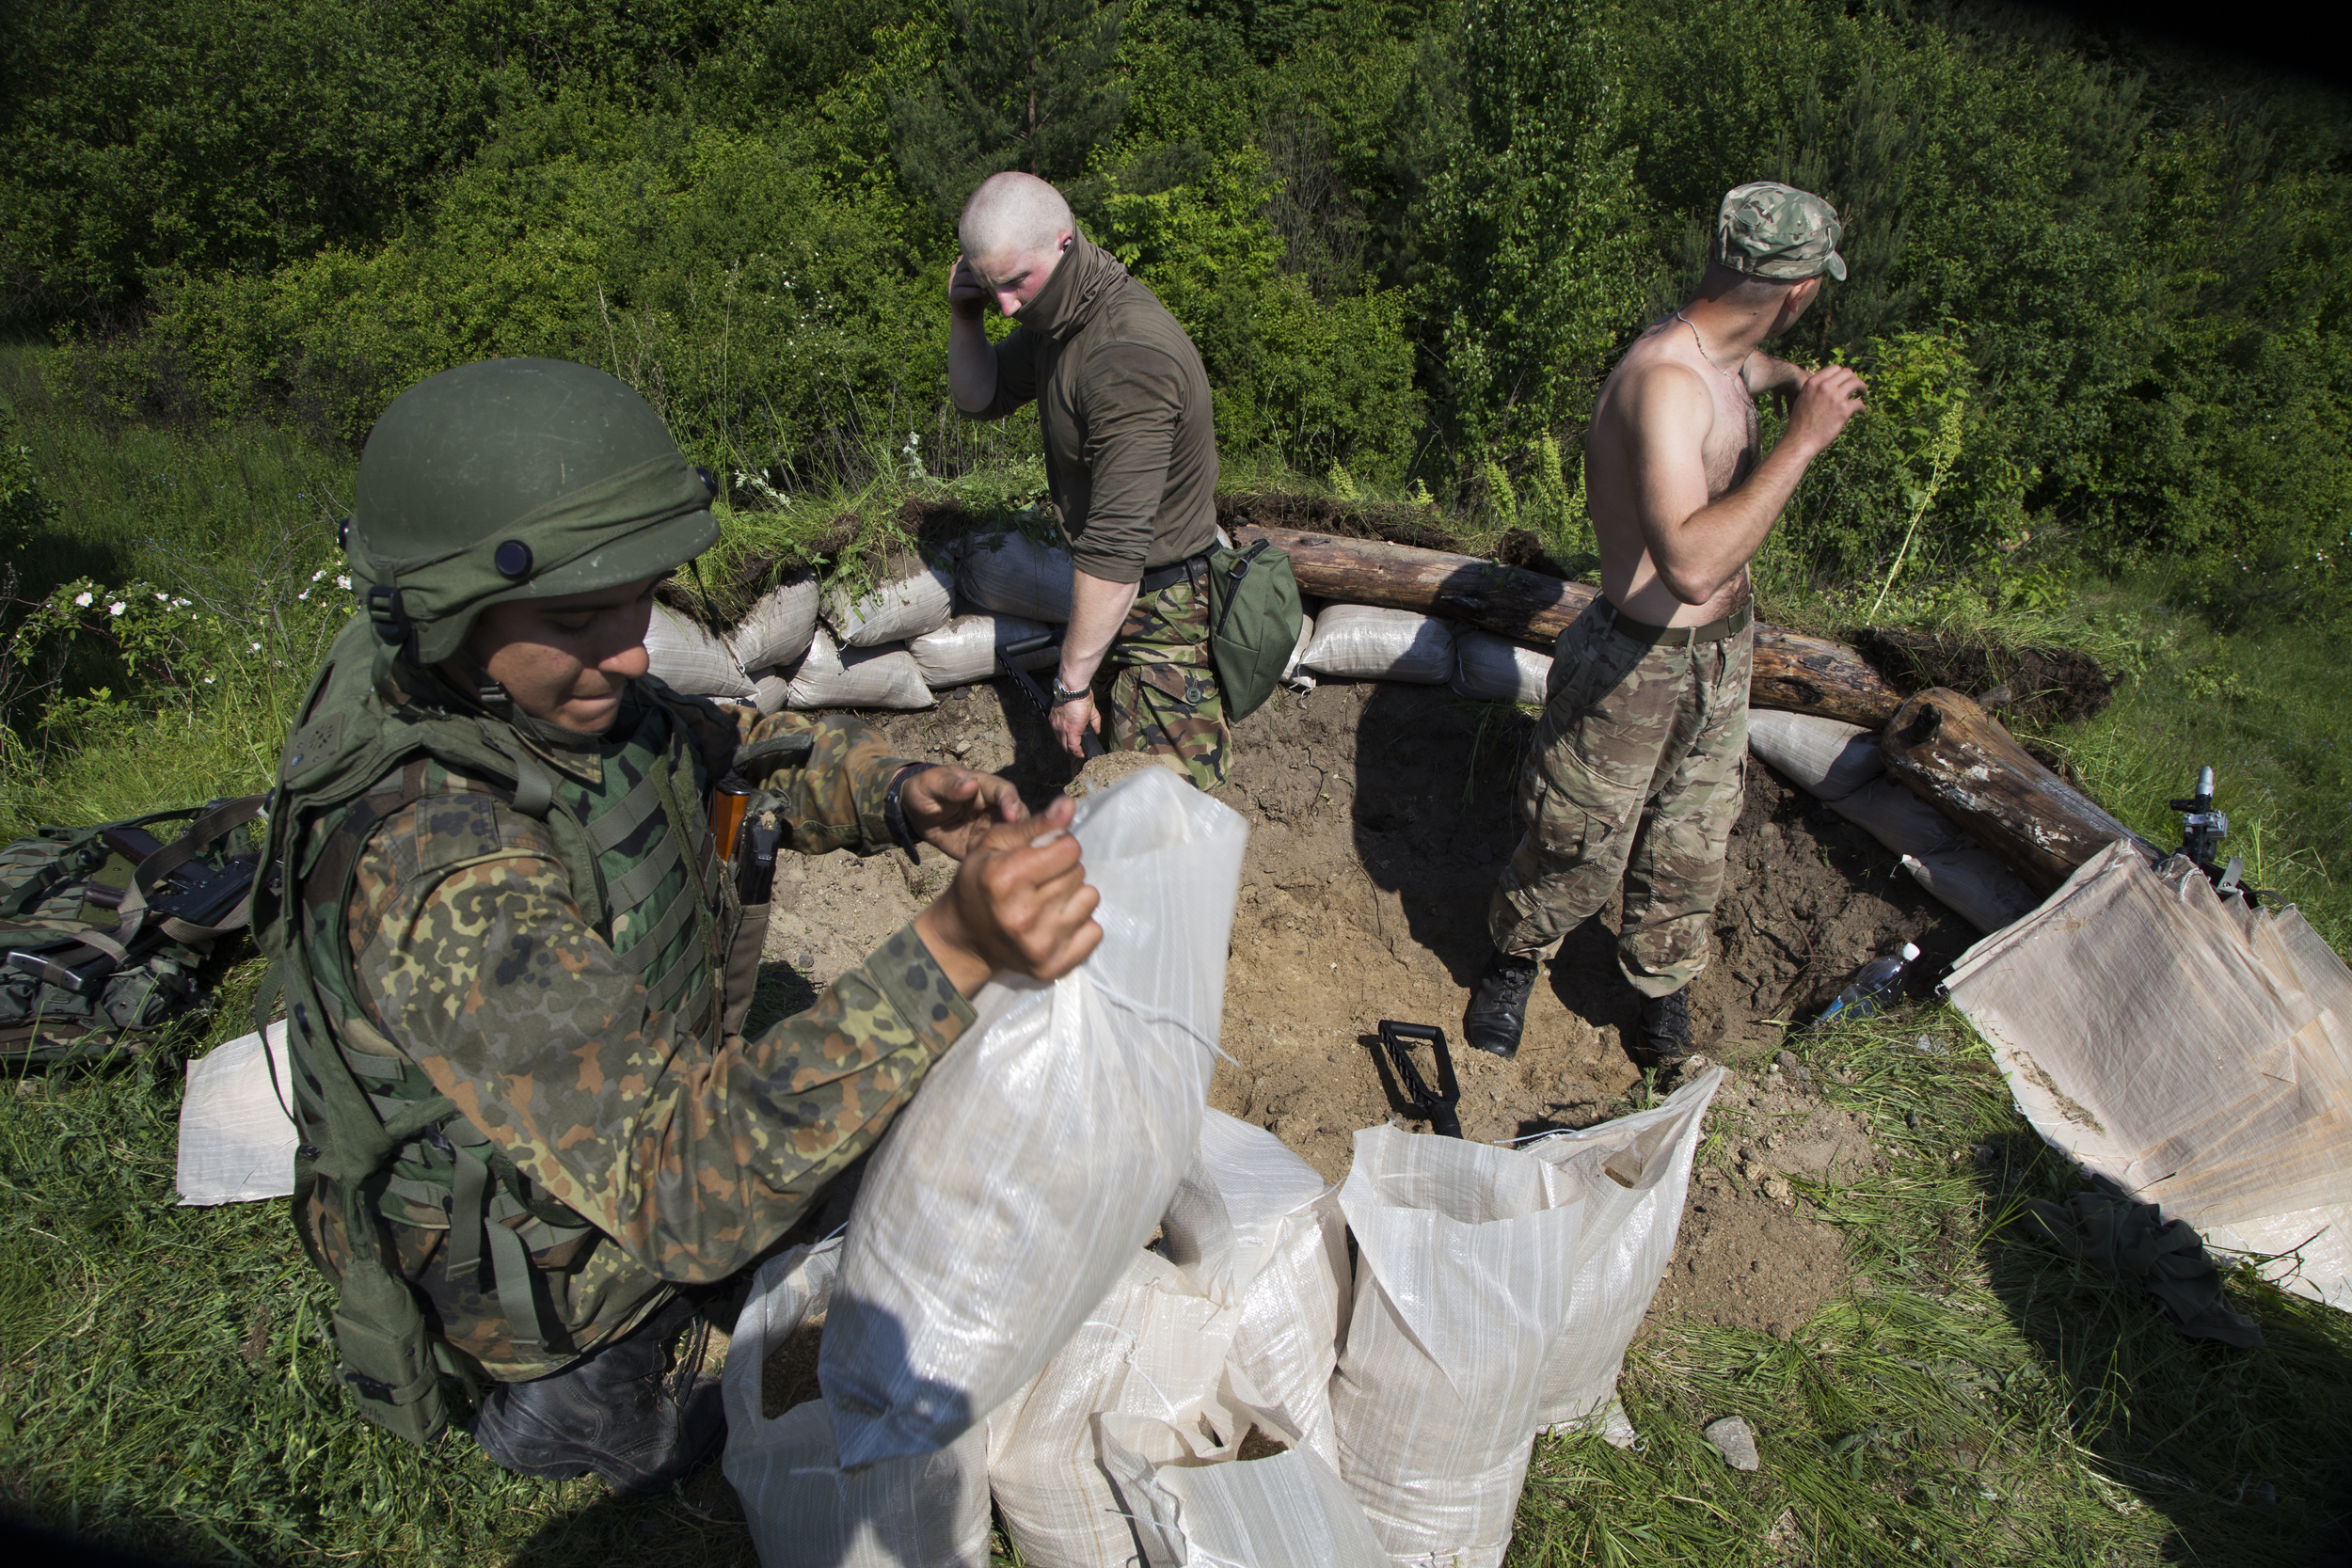  Ukrainian soldiers dig a fighting position during a 48-hour "war games" exercise versus members of the U.S.'s 173rd Airborne at a military base outside of Lviv, Ukraine.&nbsp; 